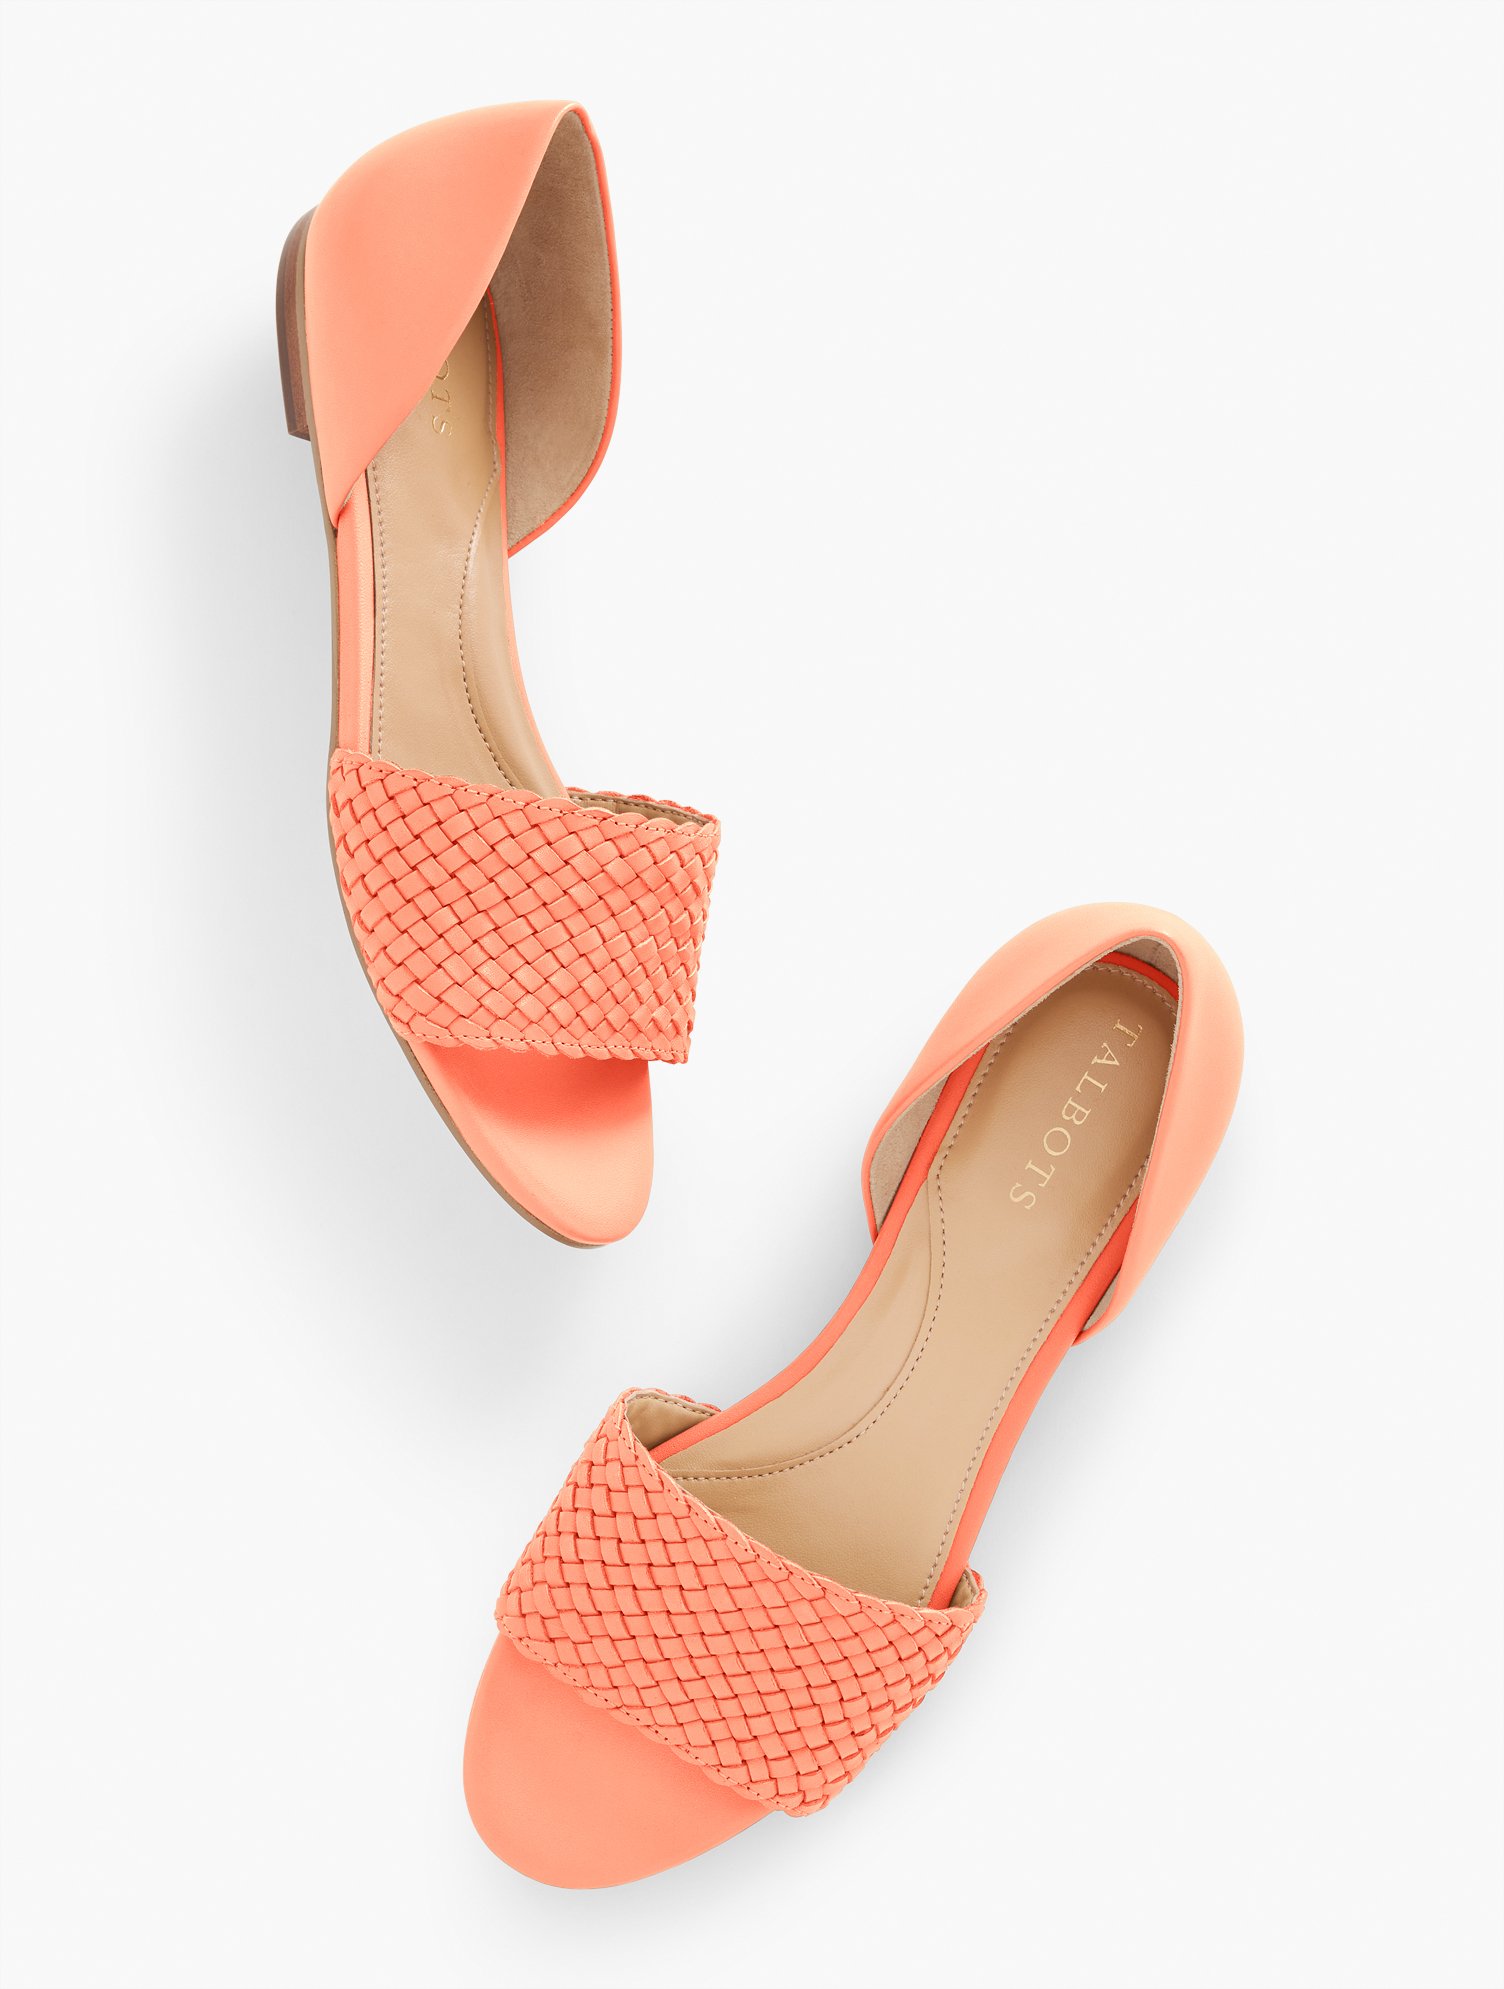 Talbots Leona Woven Leather Sandals - Sunlit Coral - 11m